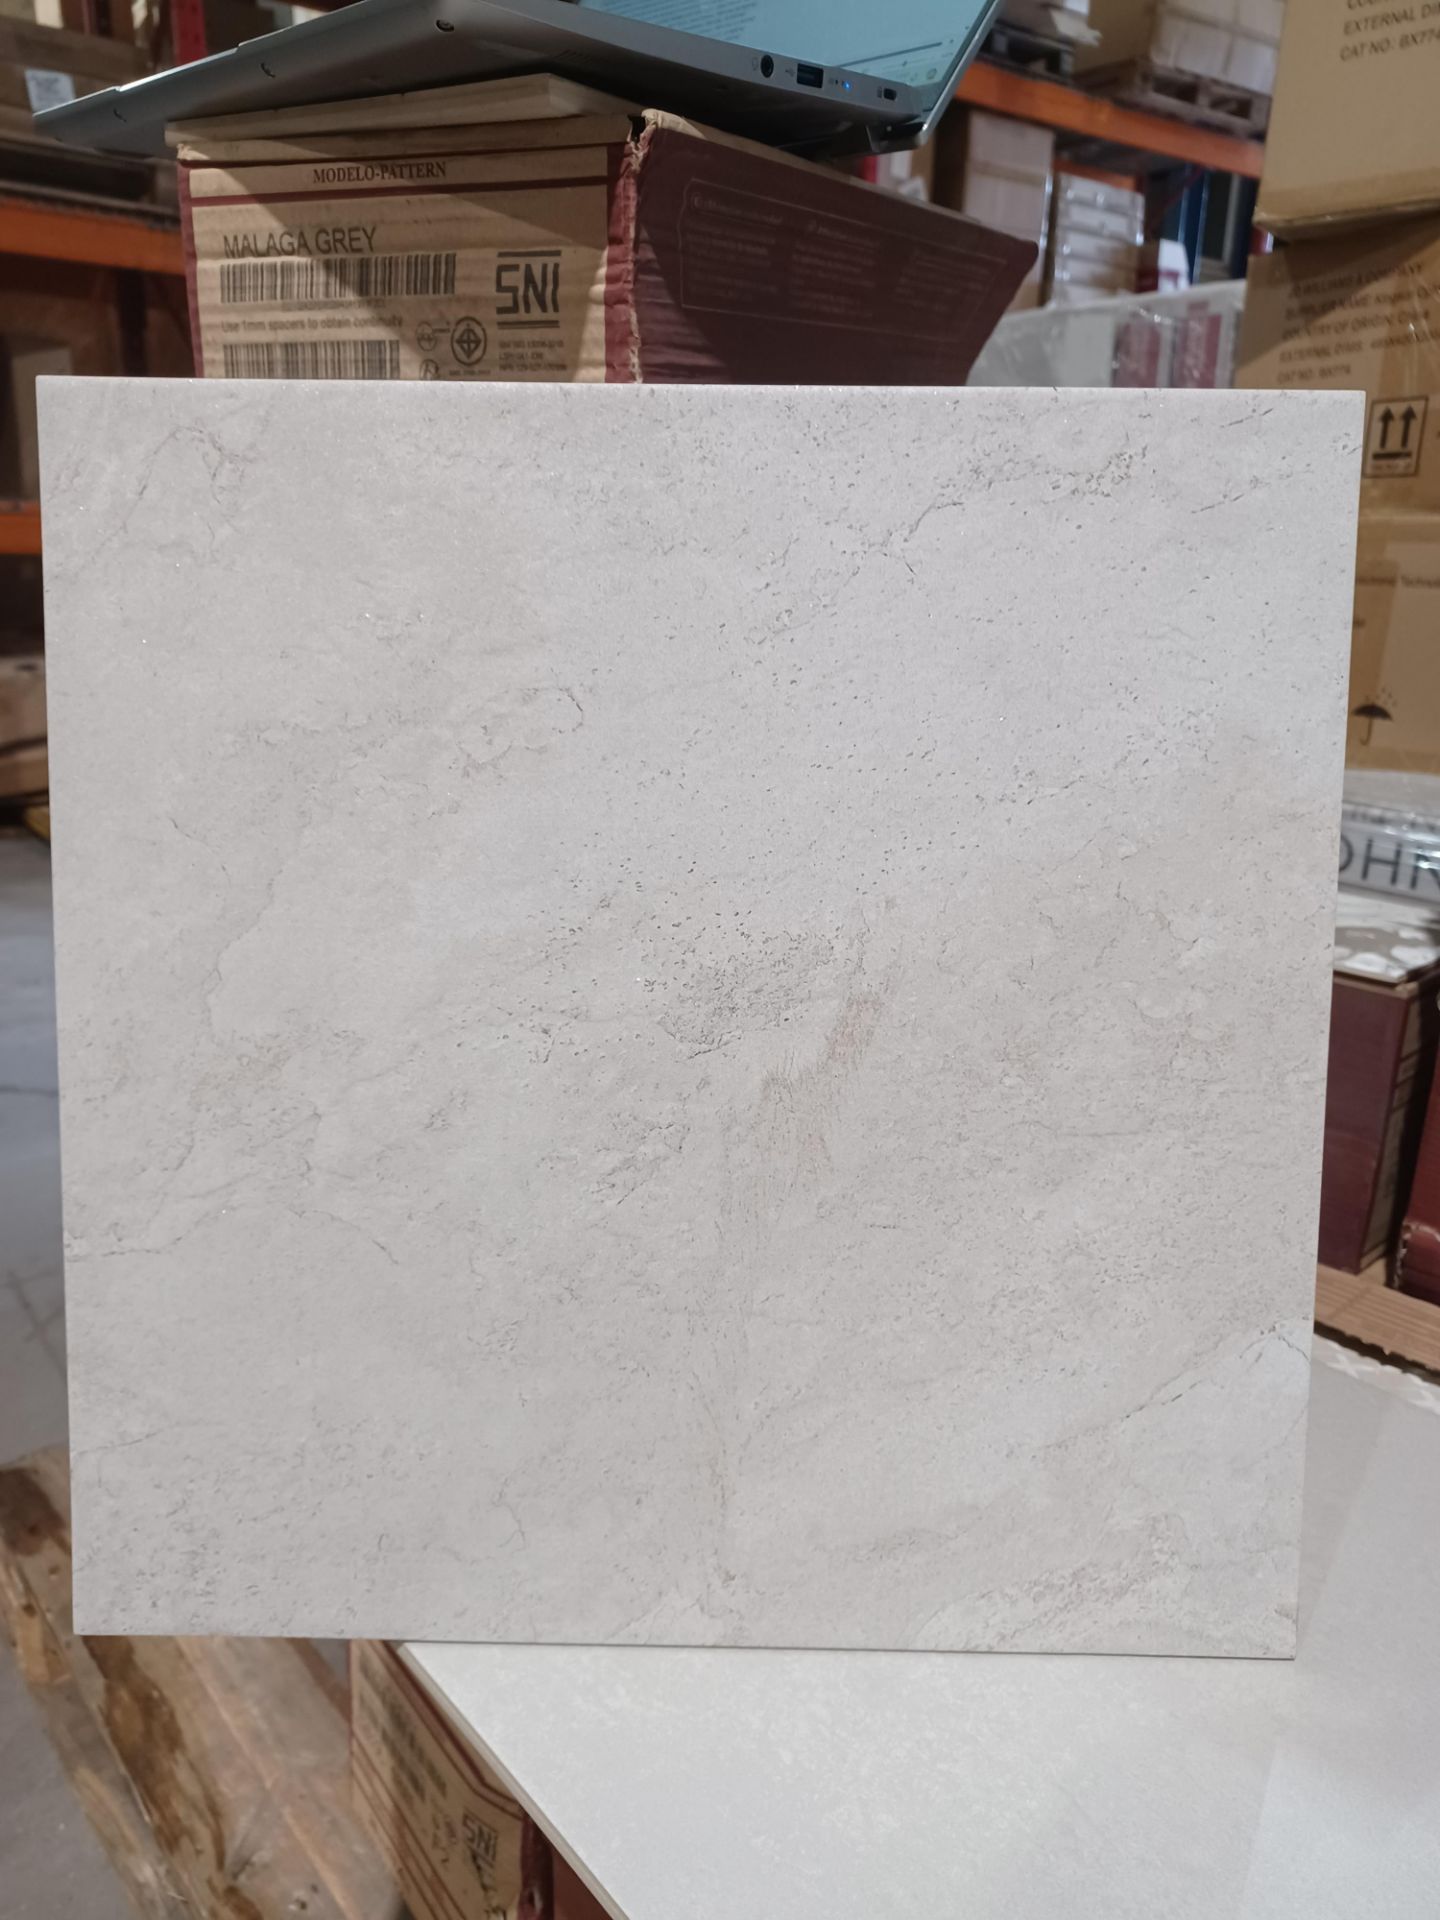 12.3 METRES SQUARED OF PORCELANOSA VENIS PROJECTS IMAGE WHITE TILES. 440x440mm. RRP £70.01 PER M2